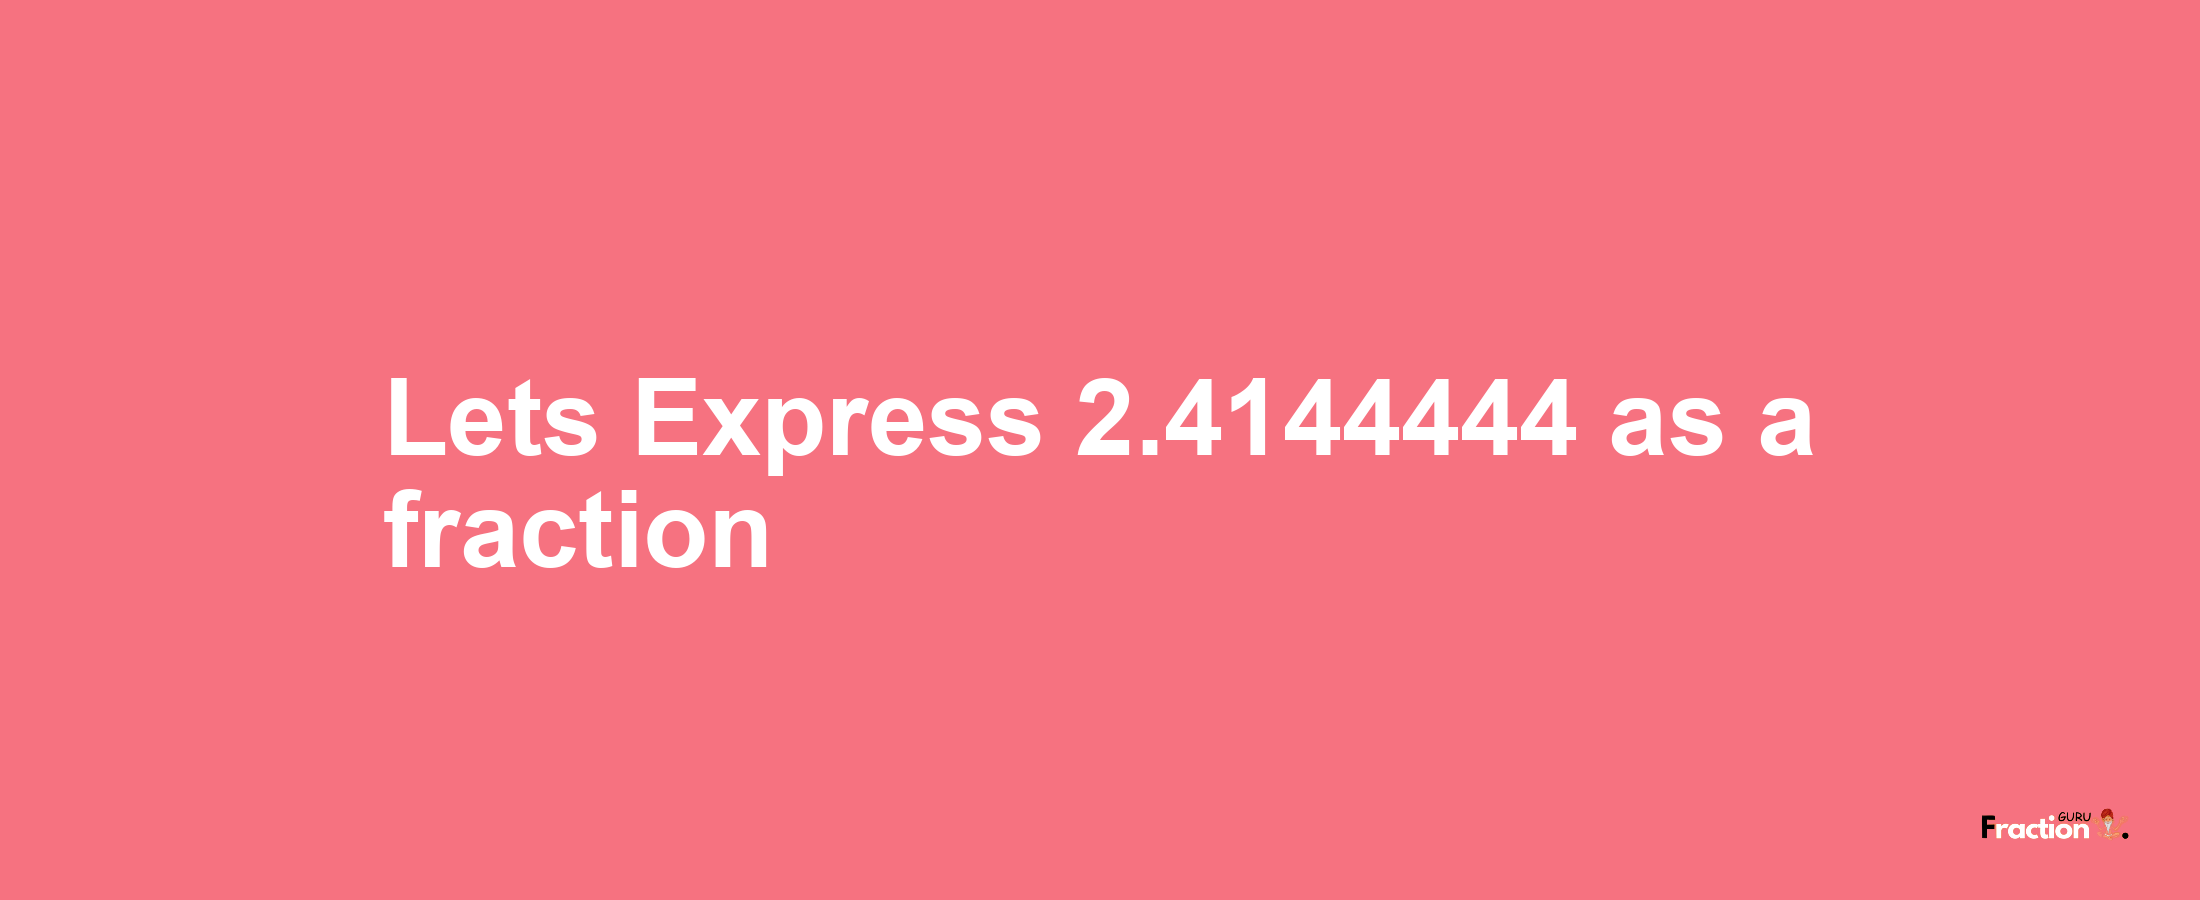 Lets Express 2.4144444 as afraction